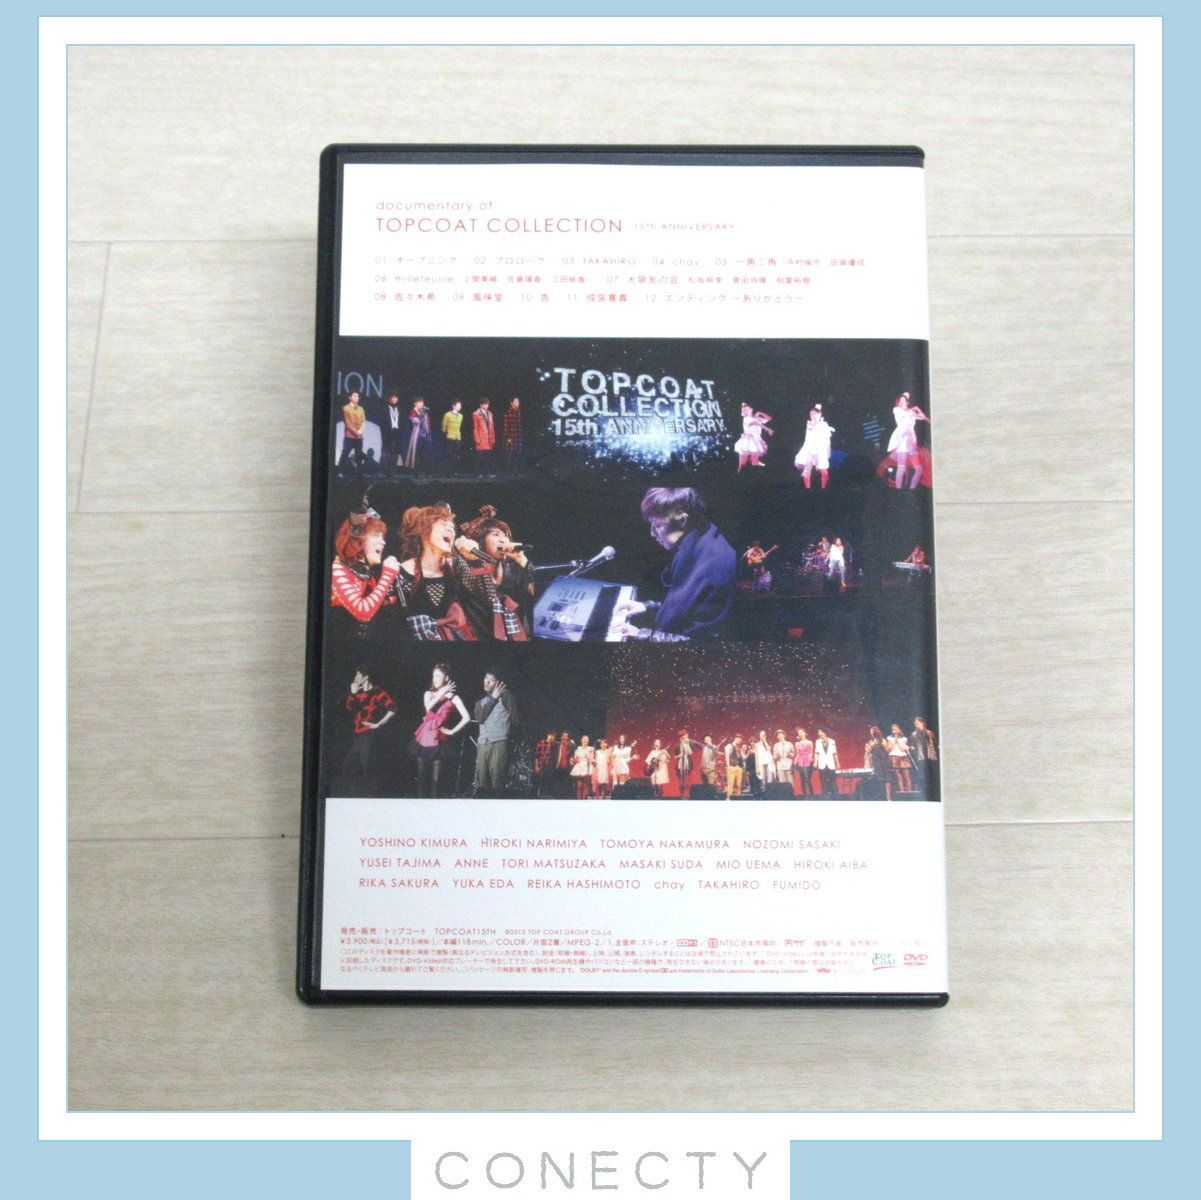 DVD☆documentary of TOPCOAT COLLECTION 15th ANNIVERSARY(6135